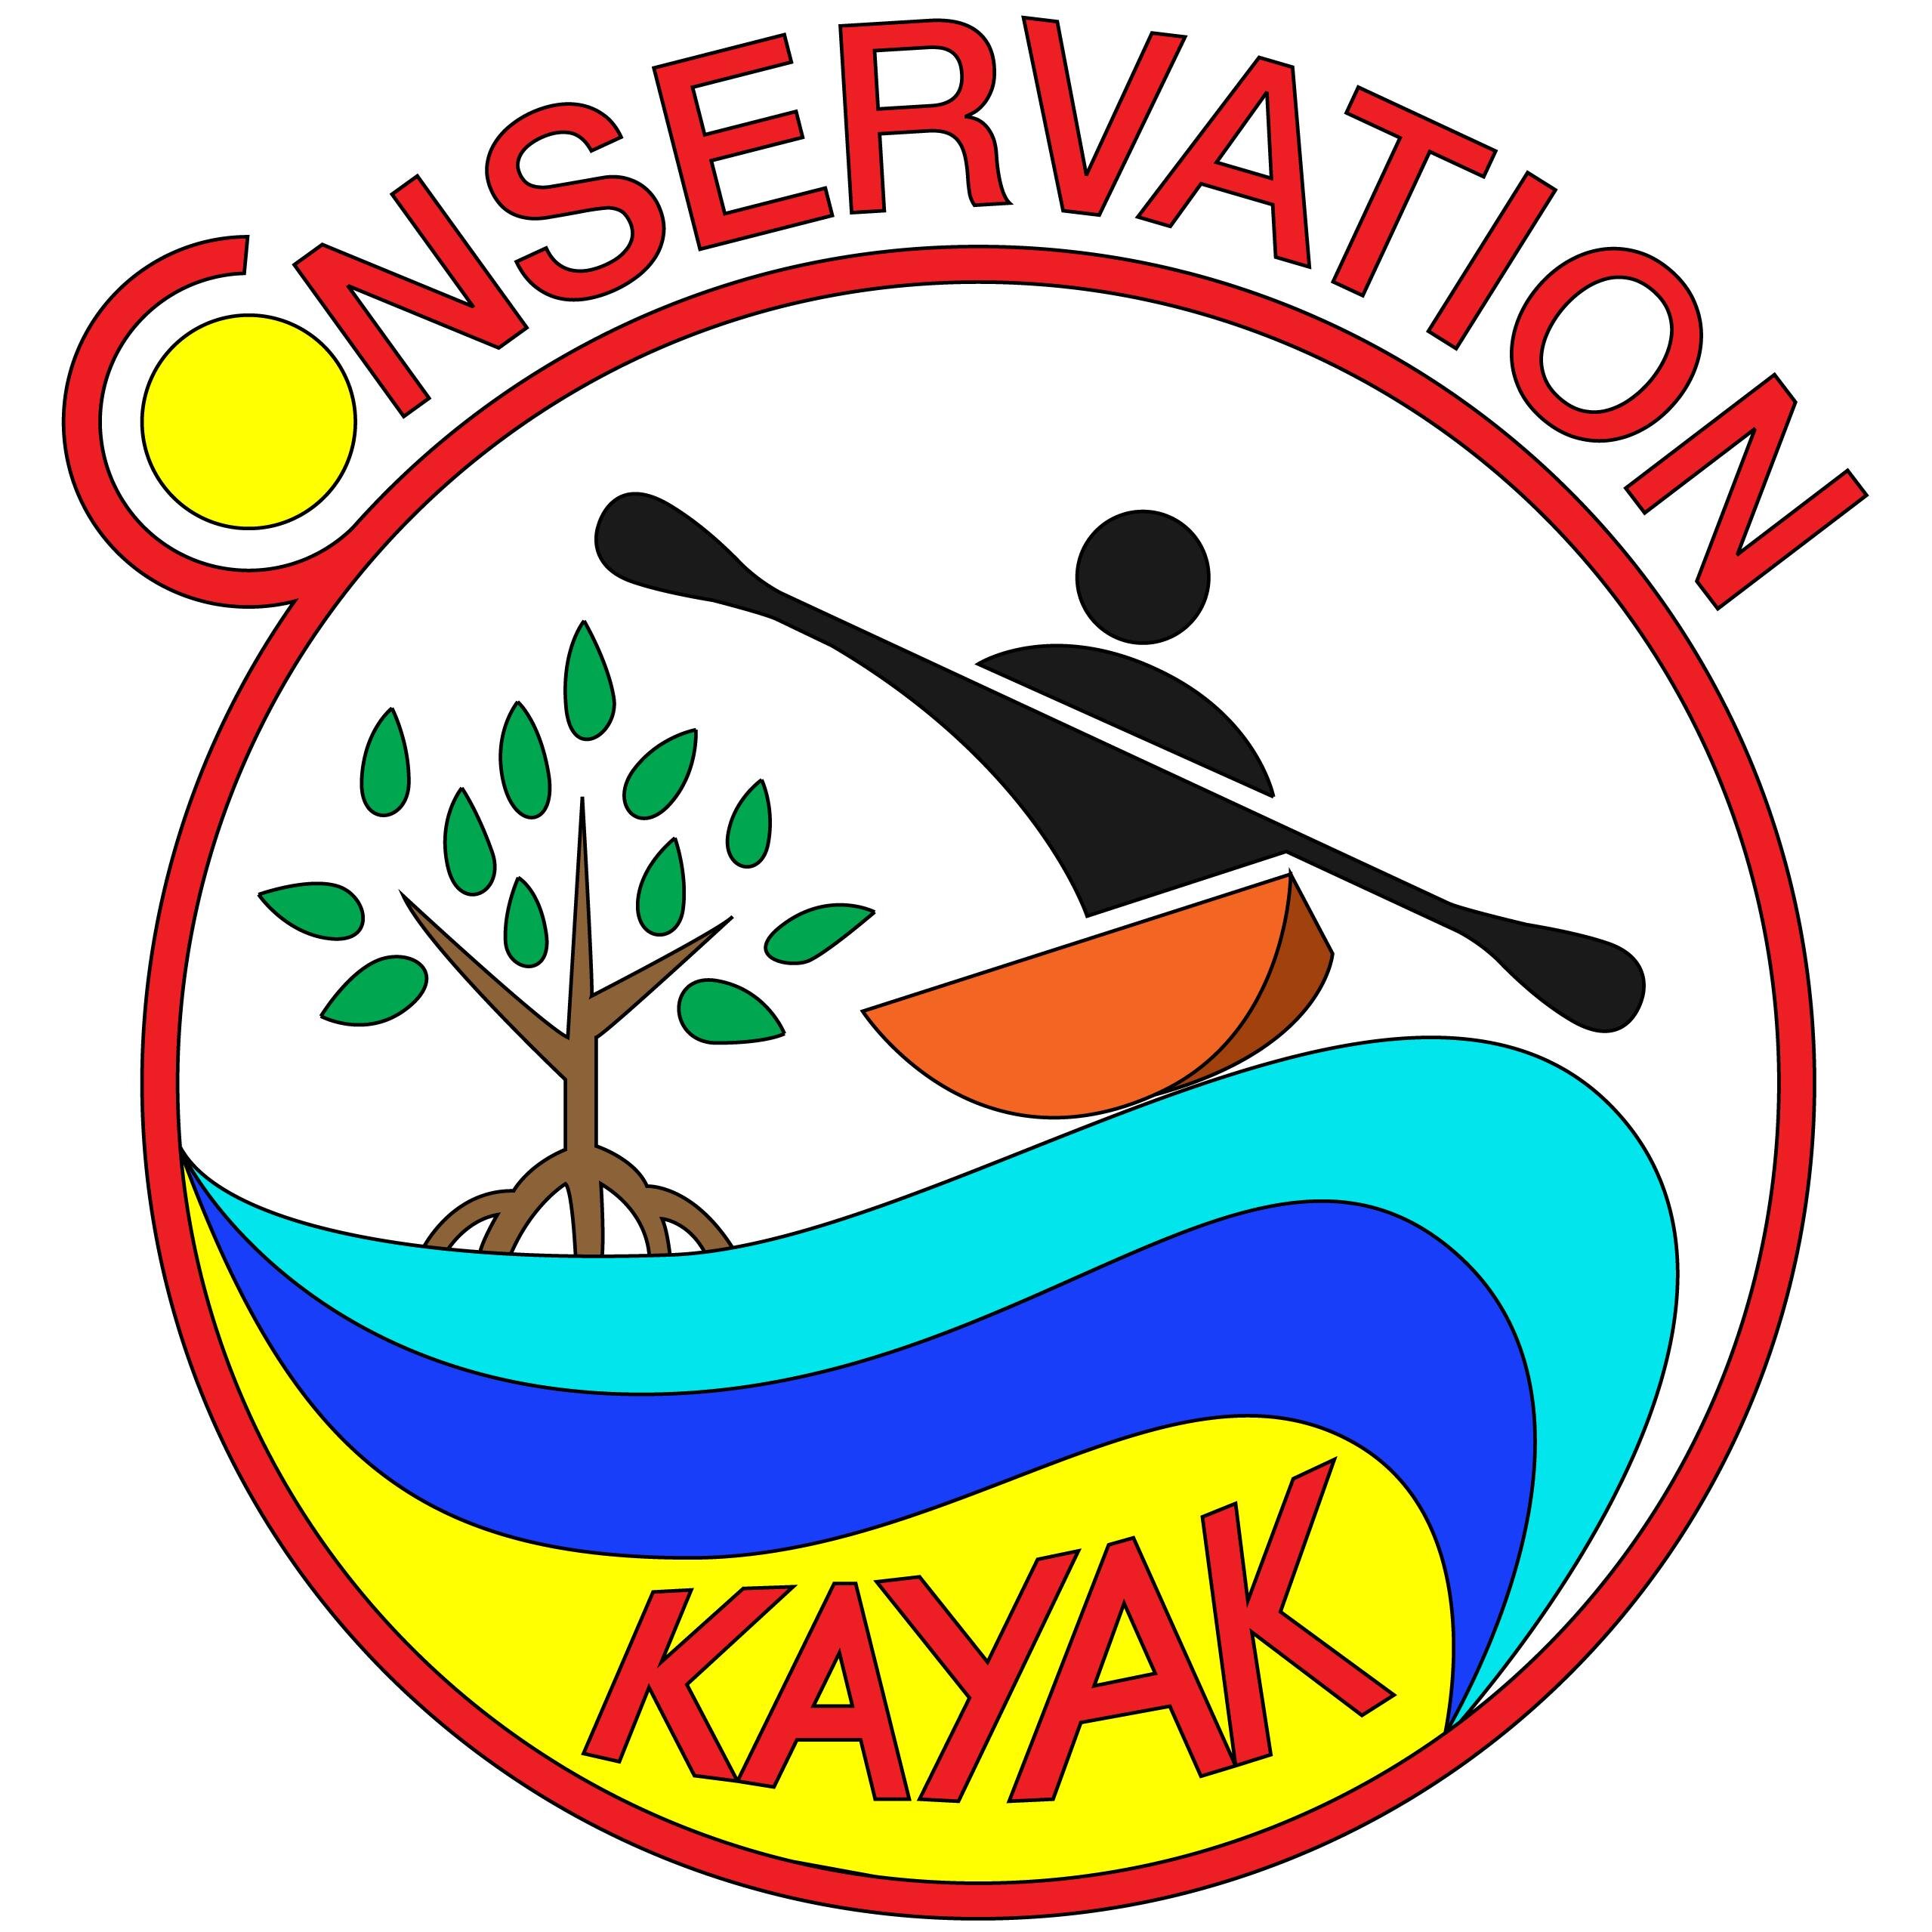 Conservation Kayak offers personalised, guided kayak trips that focus on the beauty of nature on the Caribbean island of Grenada.